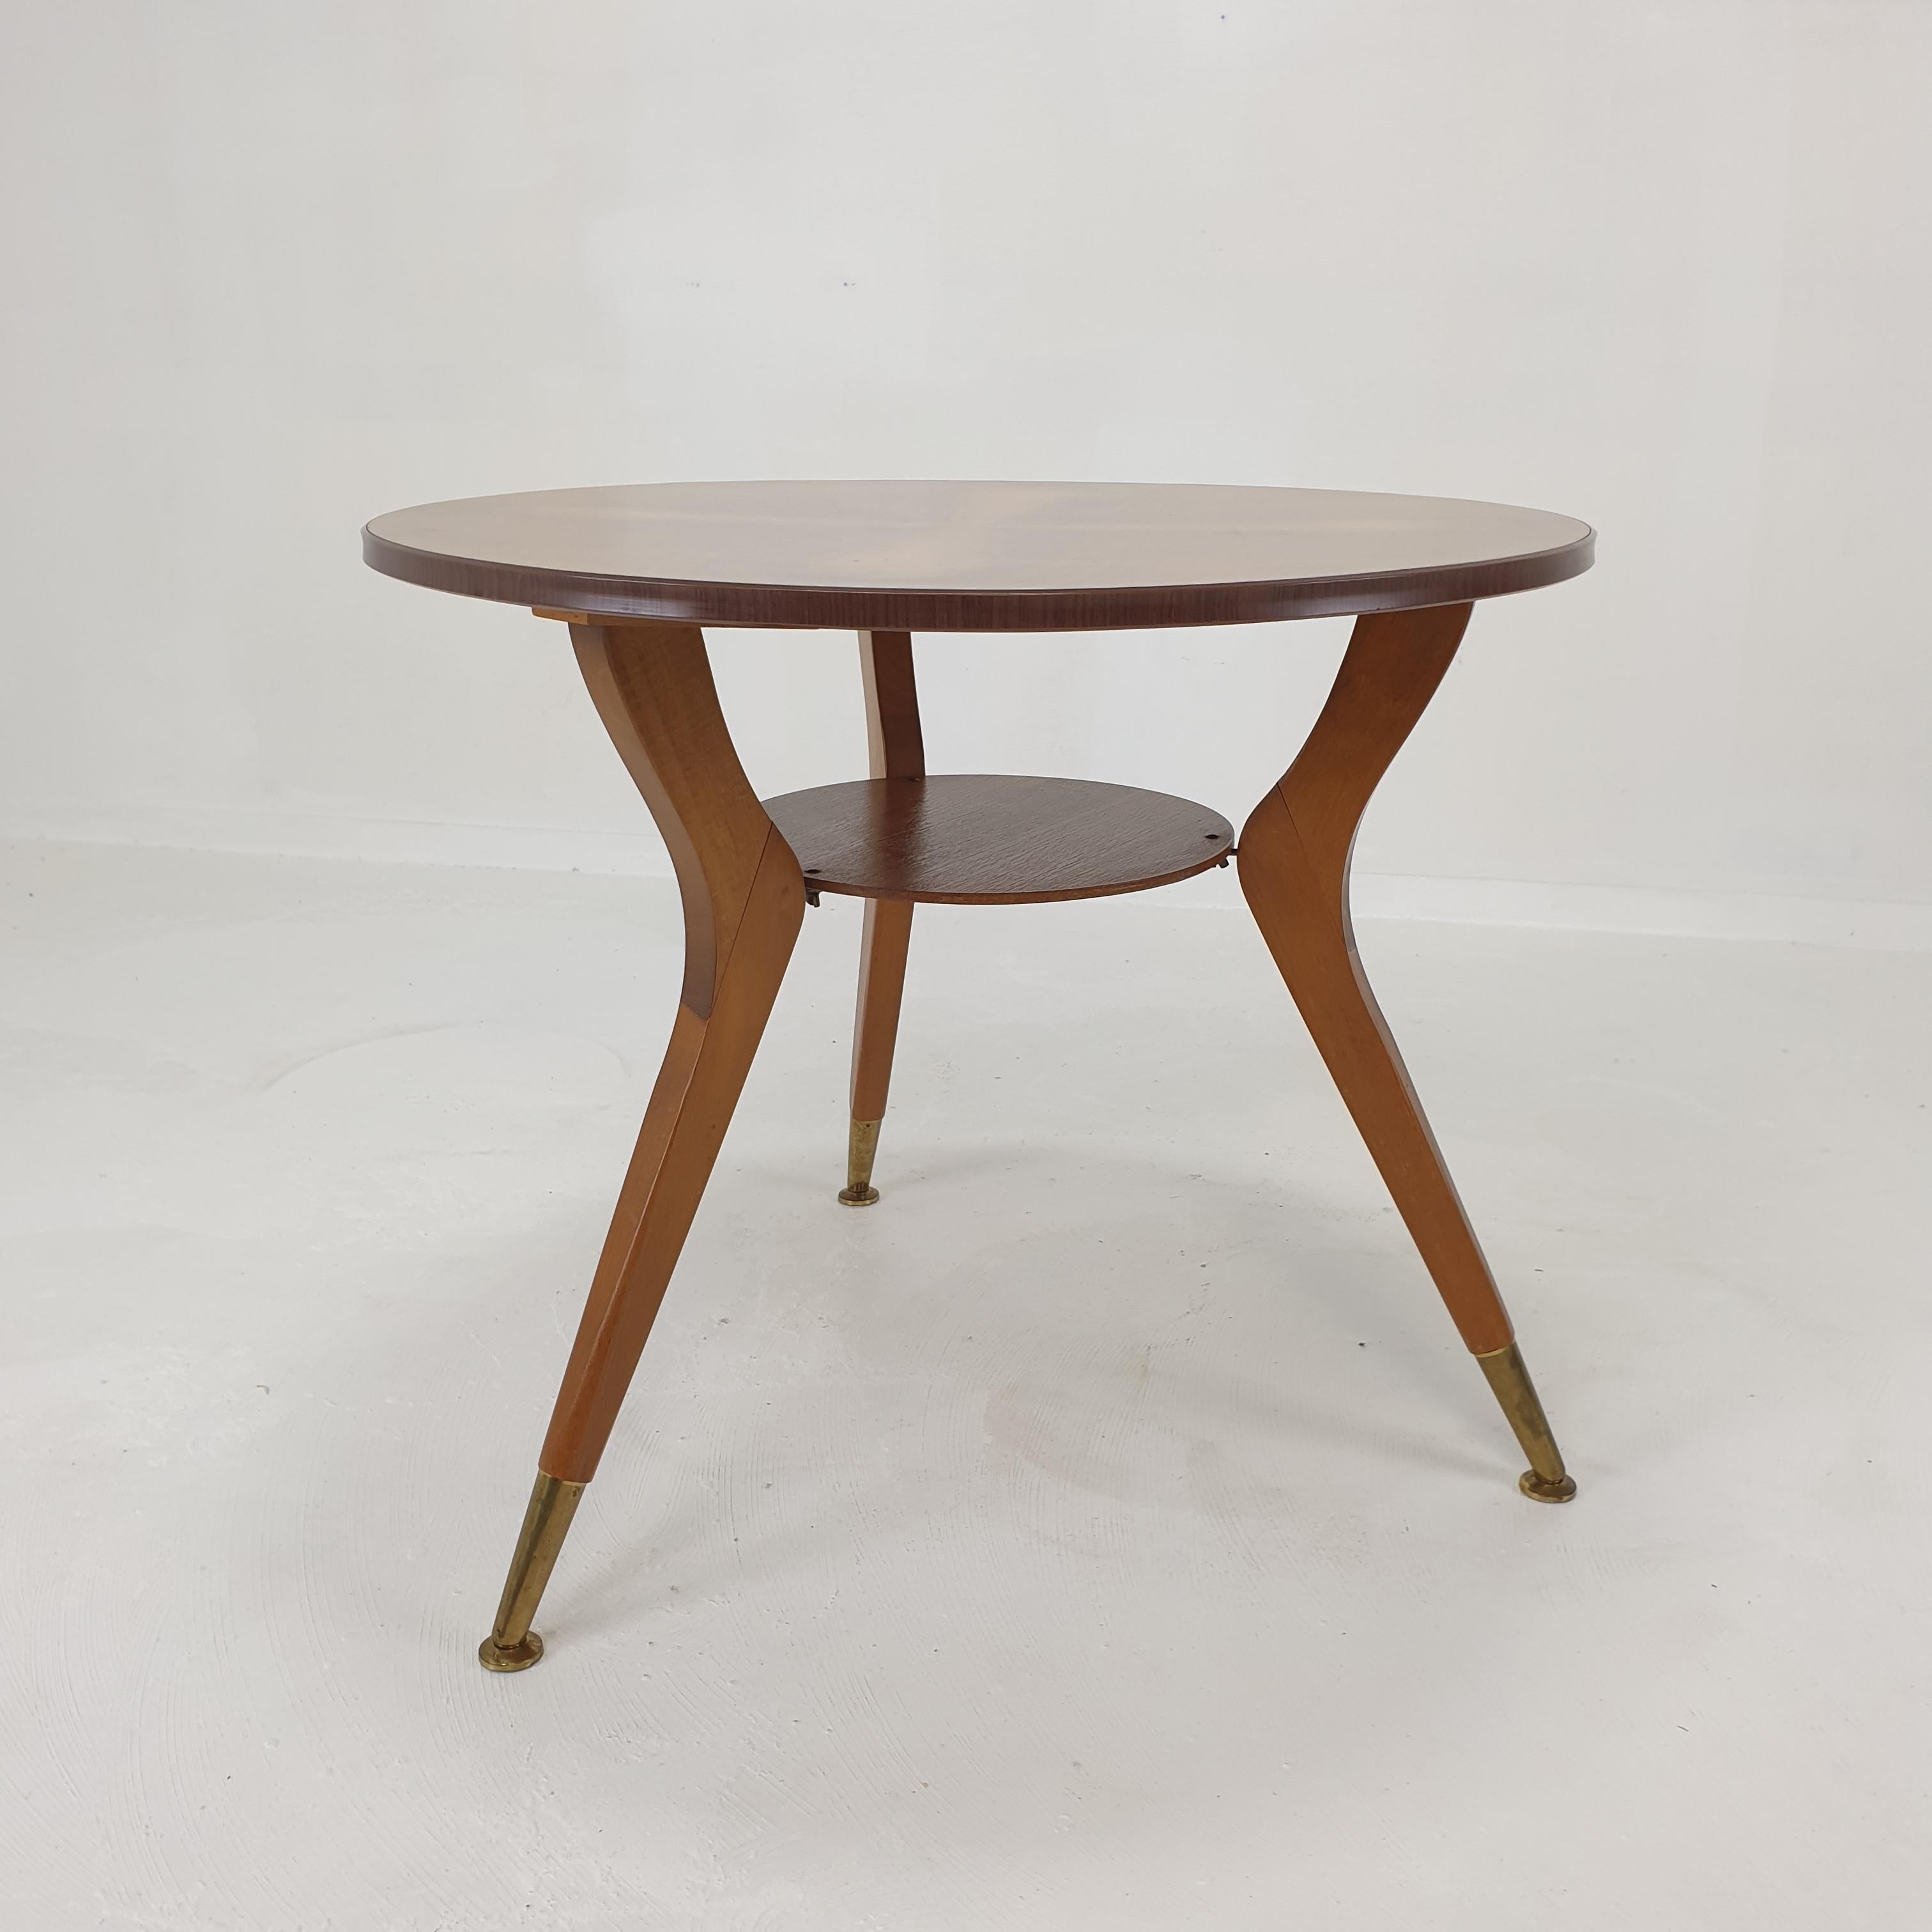 Midcentury Italian Wooden Coffee or Side Table with Brass Feet, 1960s In Good Condition For Sale In Oud Beijerland, NL